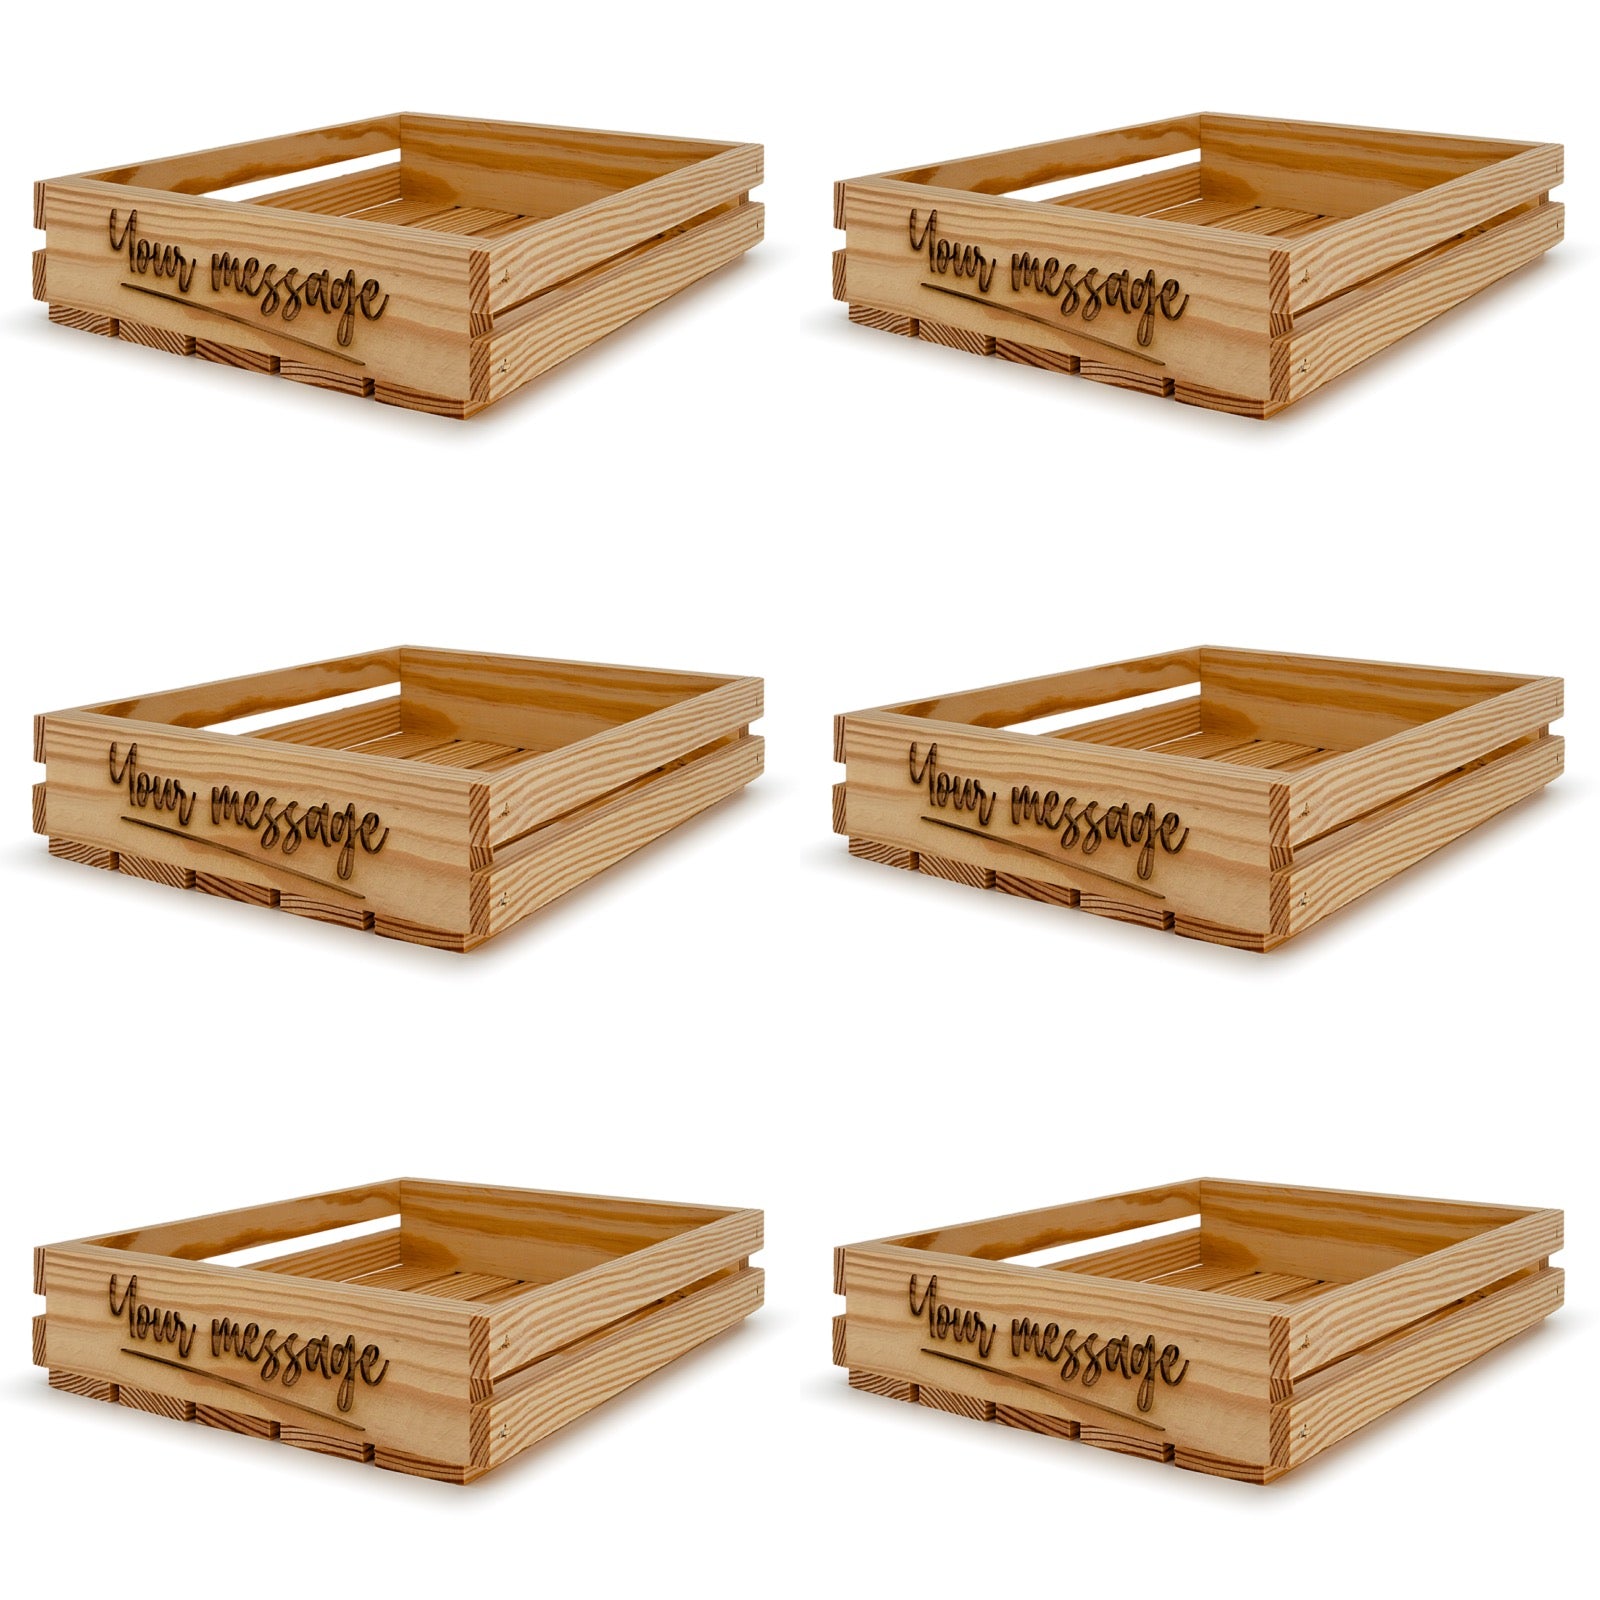 6 Small wooden crates 12x10x2.5 your message included